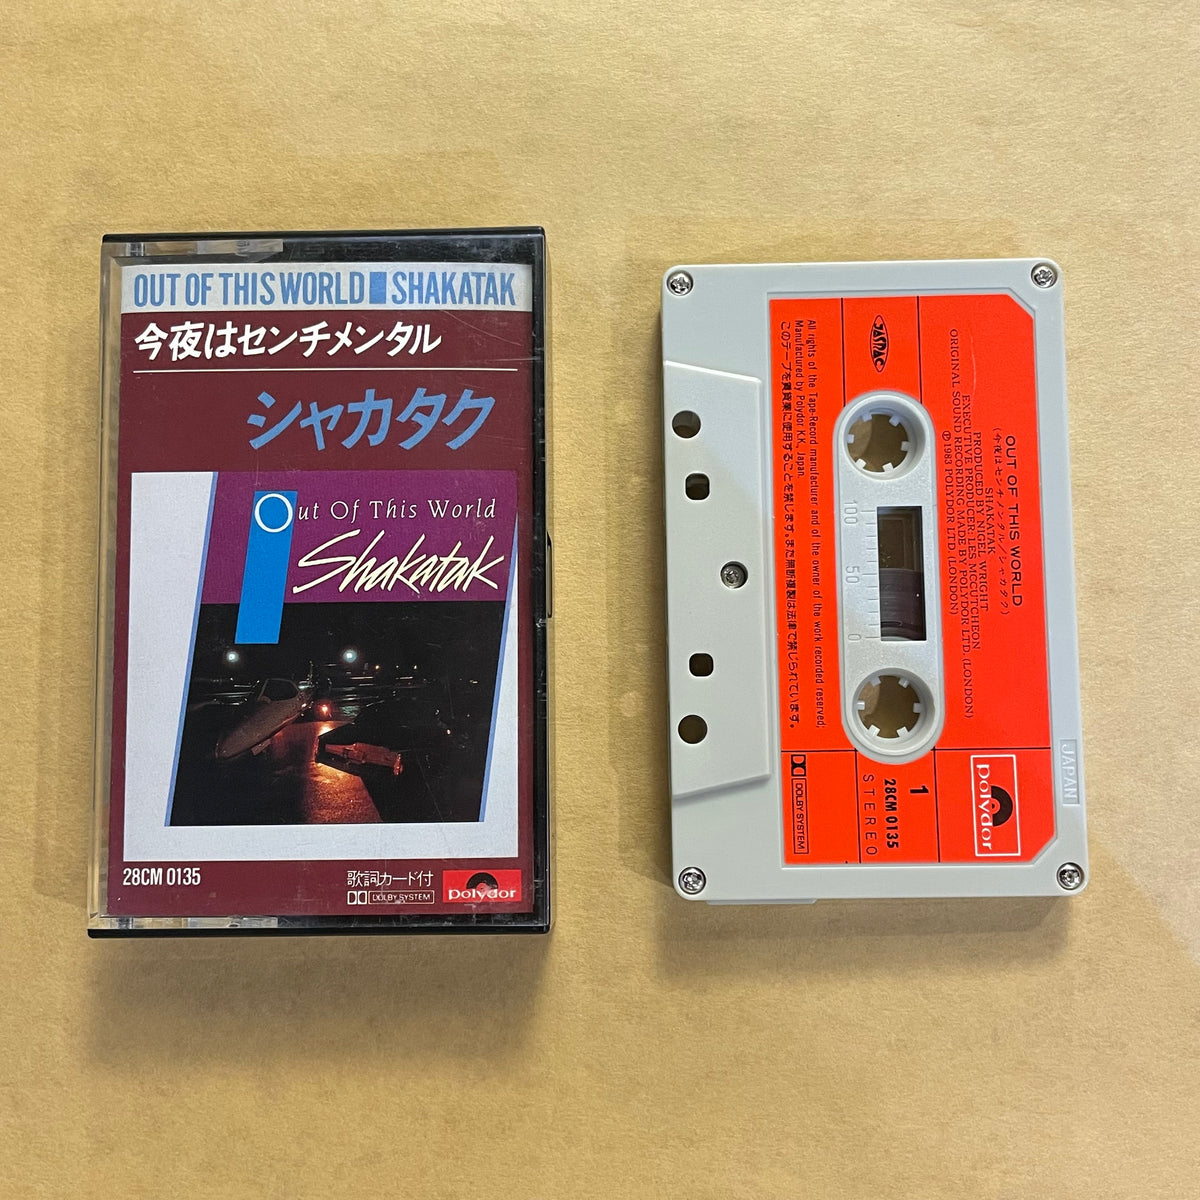 Out Of This World【TAPE】- Shakatak – ODD TAPE